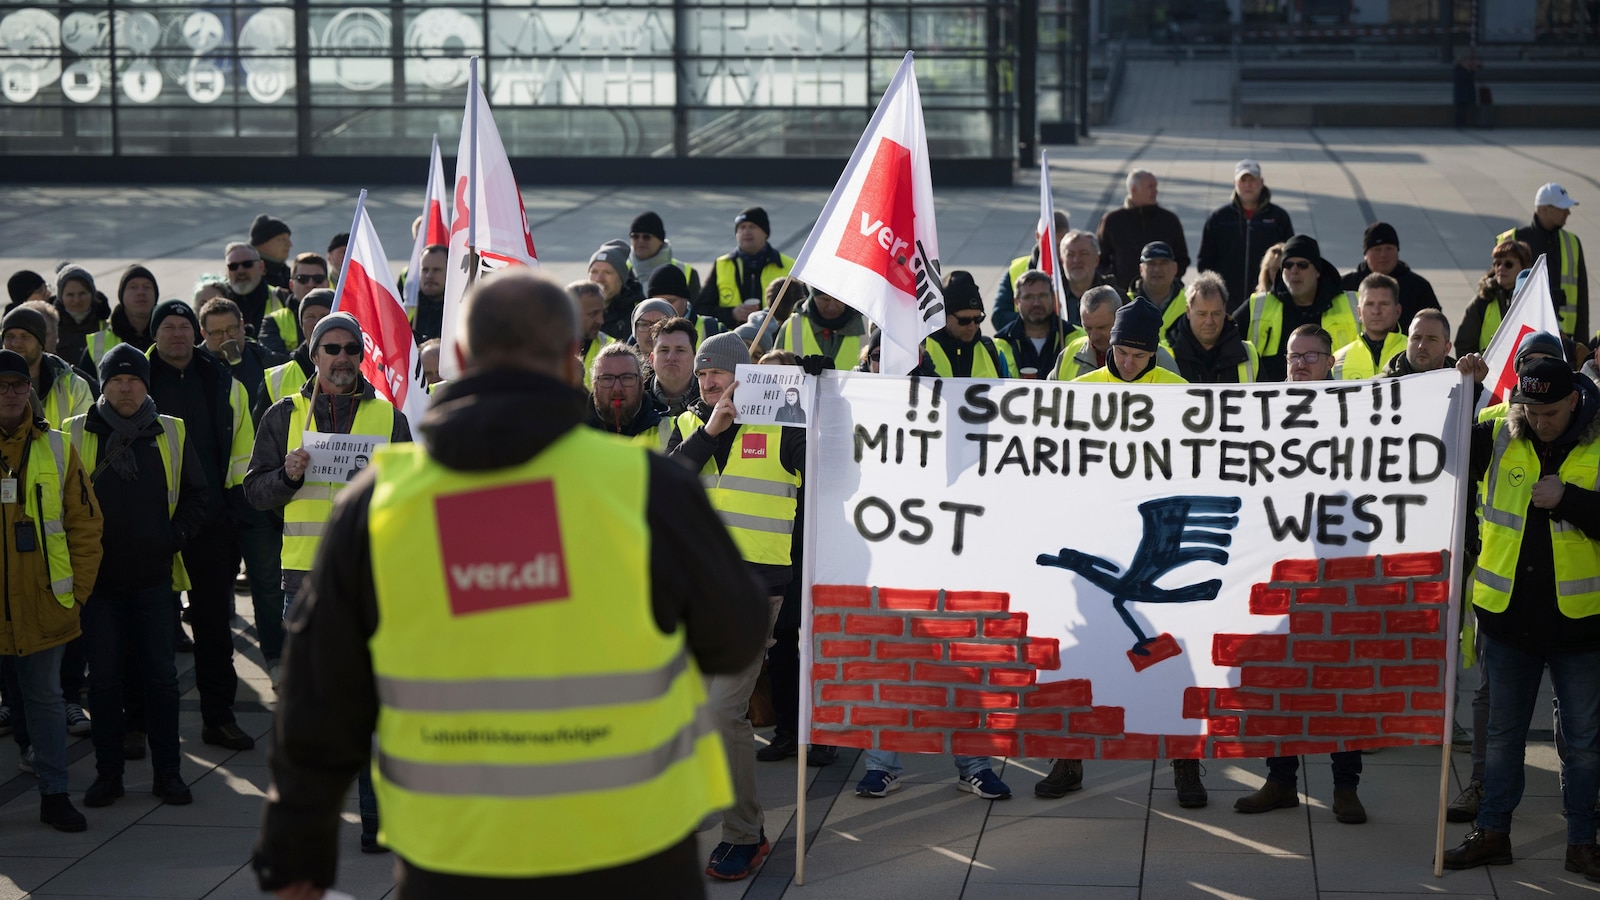 Thousands and thousands of passengers are affected in Germany as union members go on strike once more